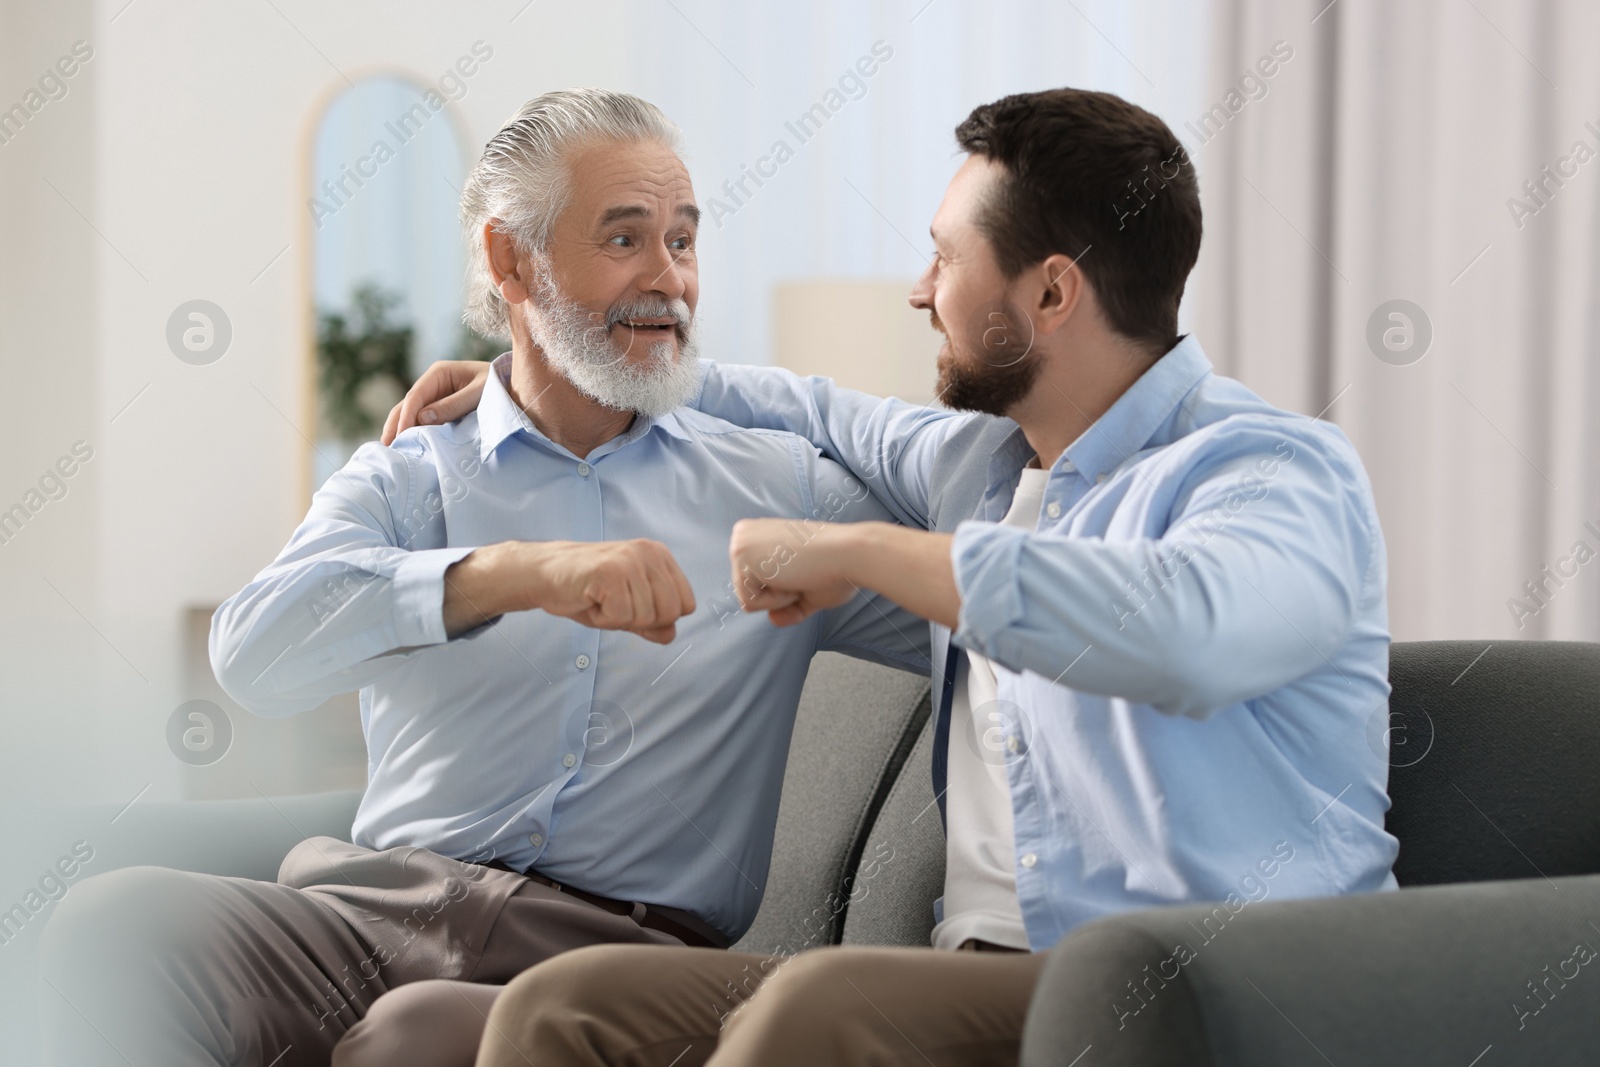 Photo of Happy son and his dad making fist bump at home